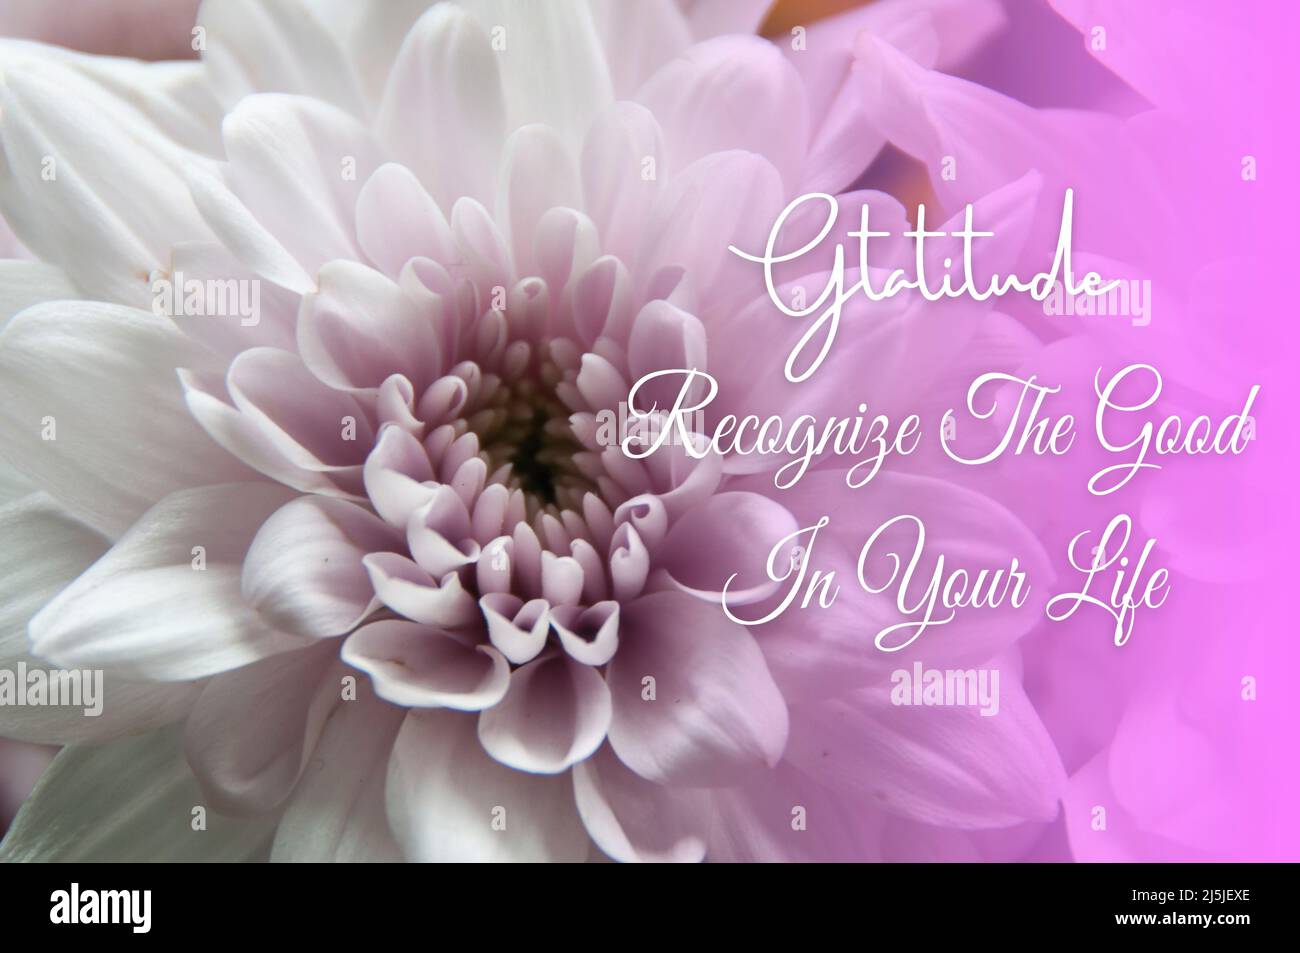 Inspirational quote text with white dahlia flower background. Motivational concept Stock Photo